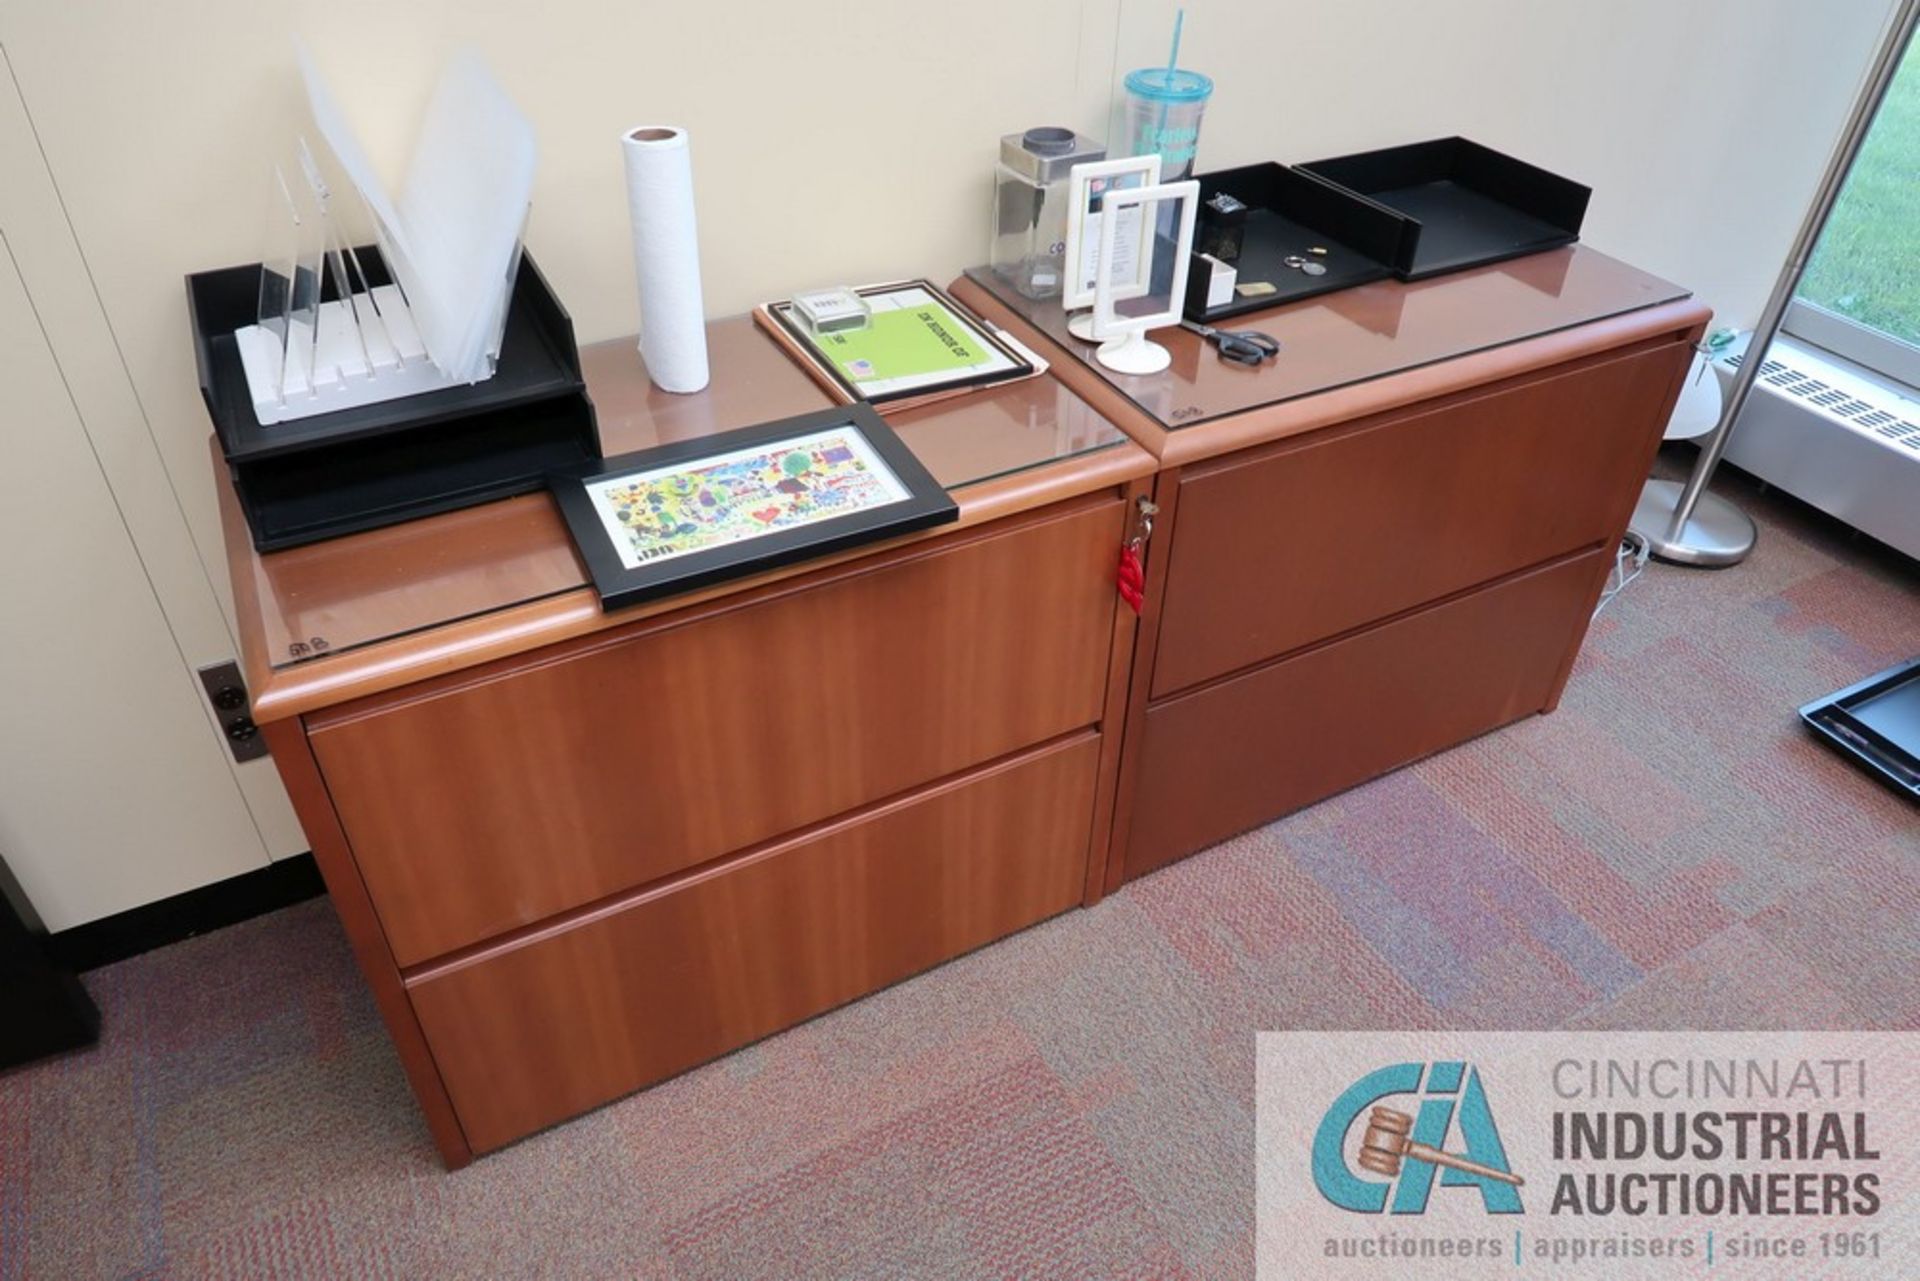 (LOT) CONTENTS OF OFFICE INCLUDES U-SHAPED DESK WITH (2) 2-DRAWER CABINETS AND (3) CHAIRS - Image 2 of 4